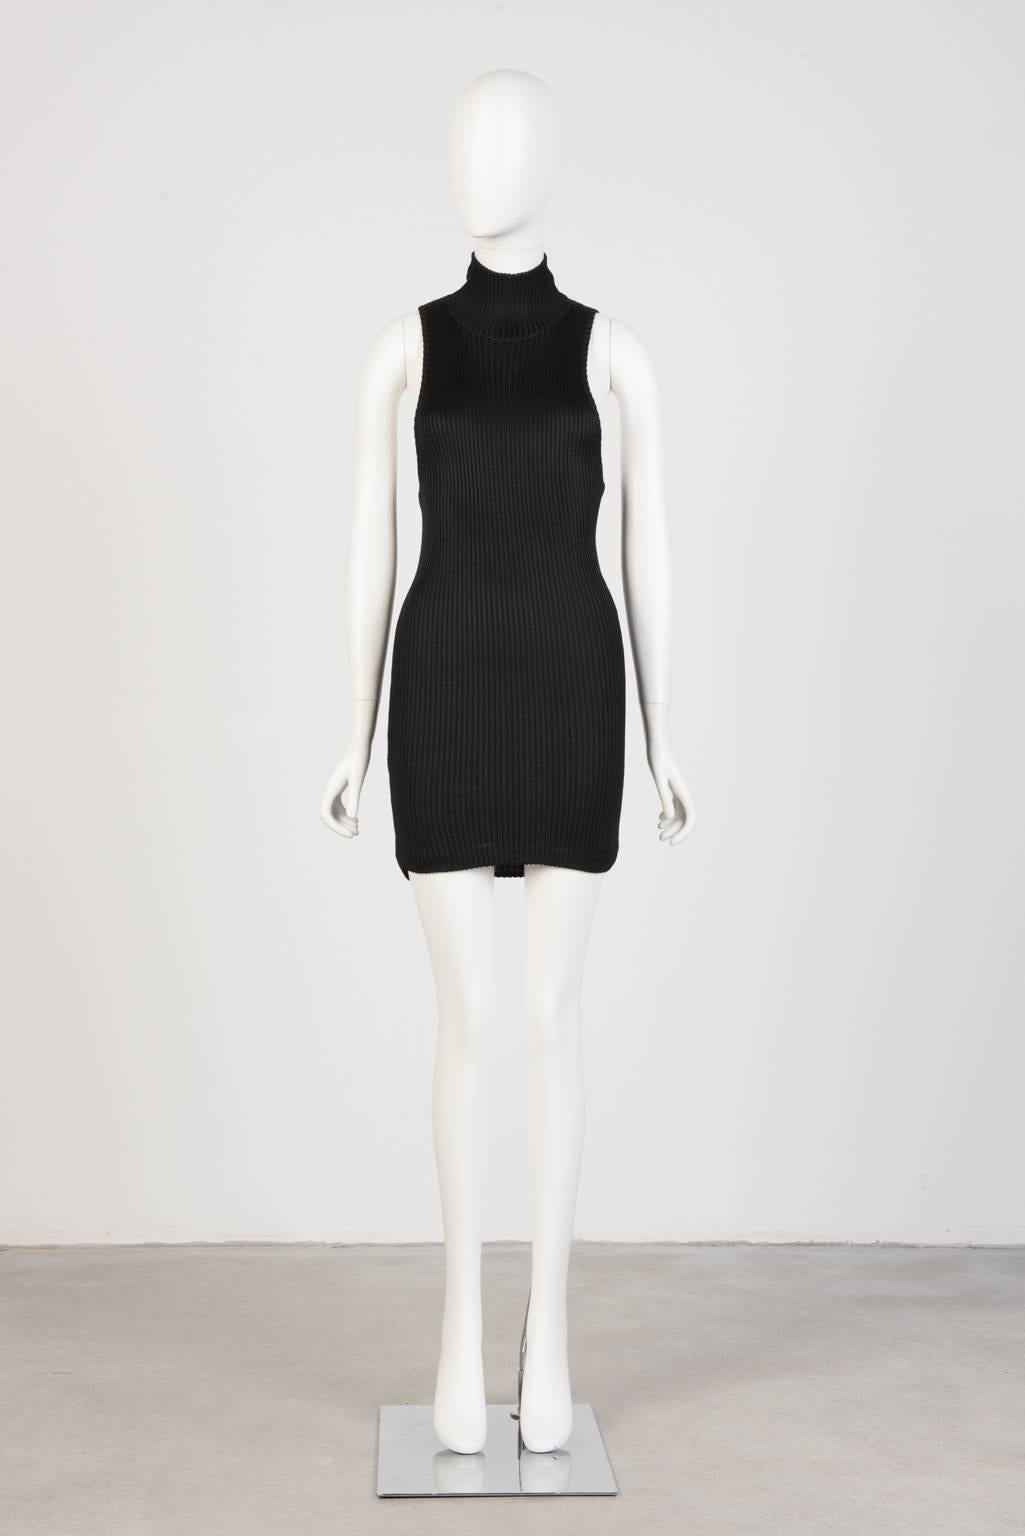 Sleeveless, turtleneck mini dress with low cut arms in heavy, stretch ribbed knit